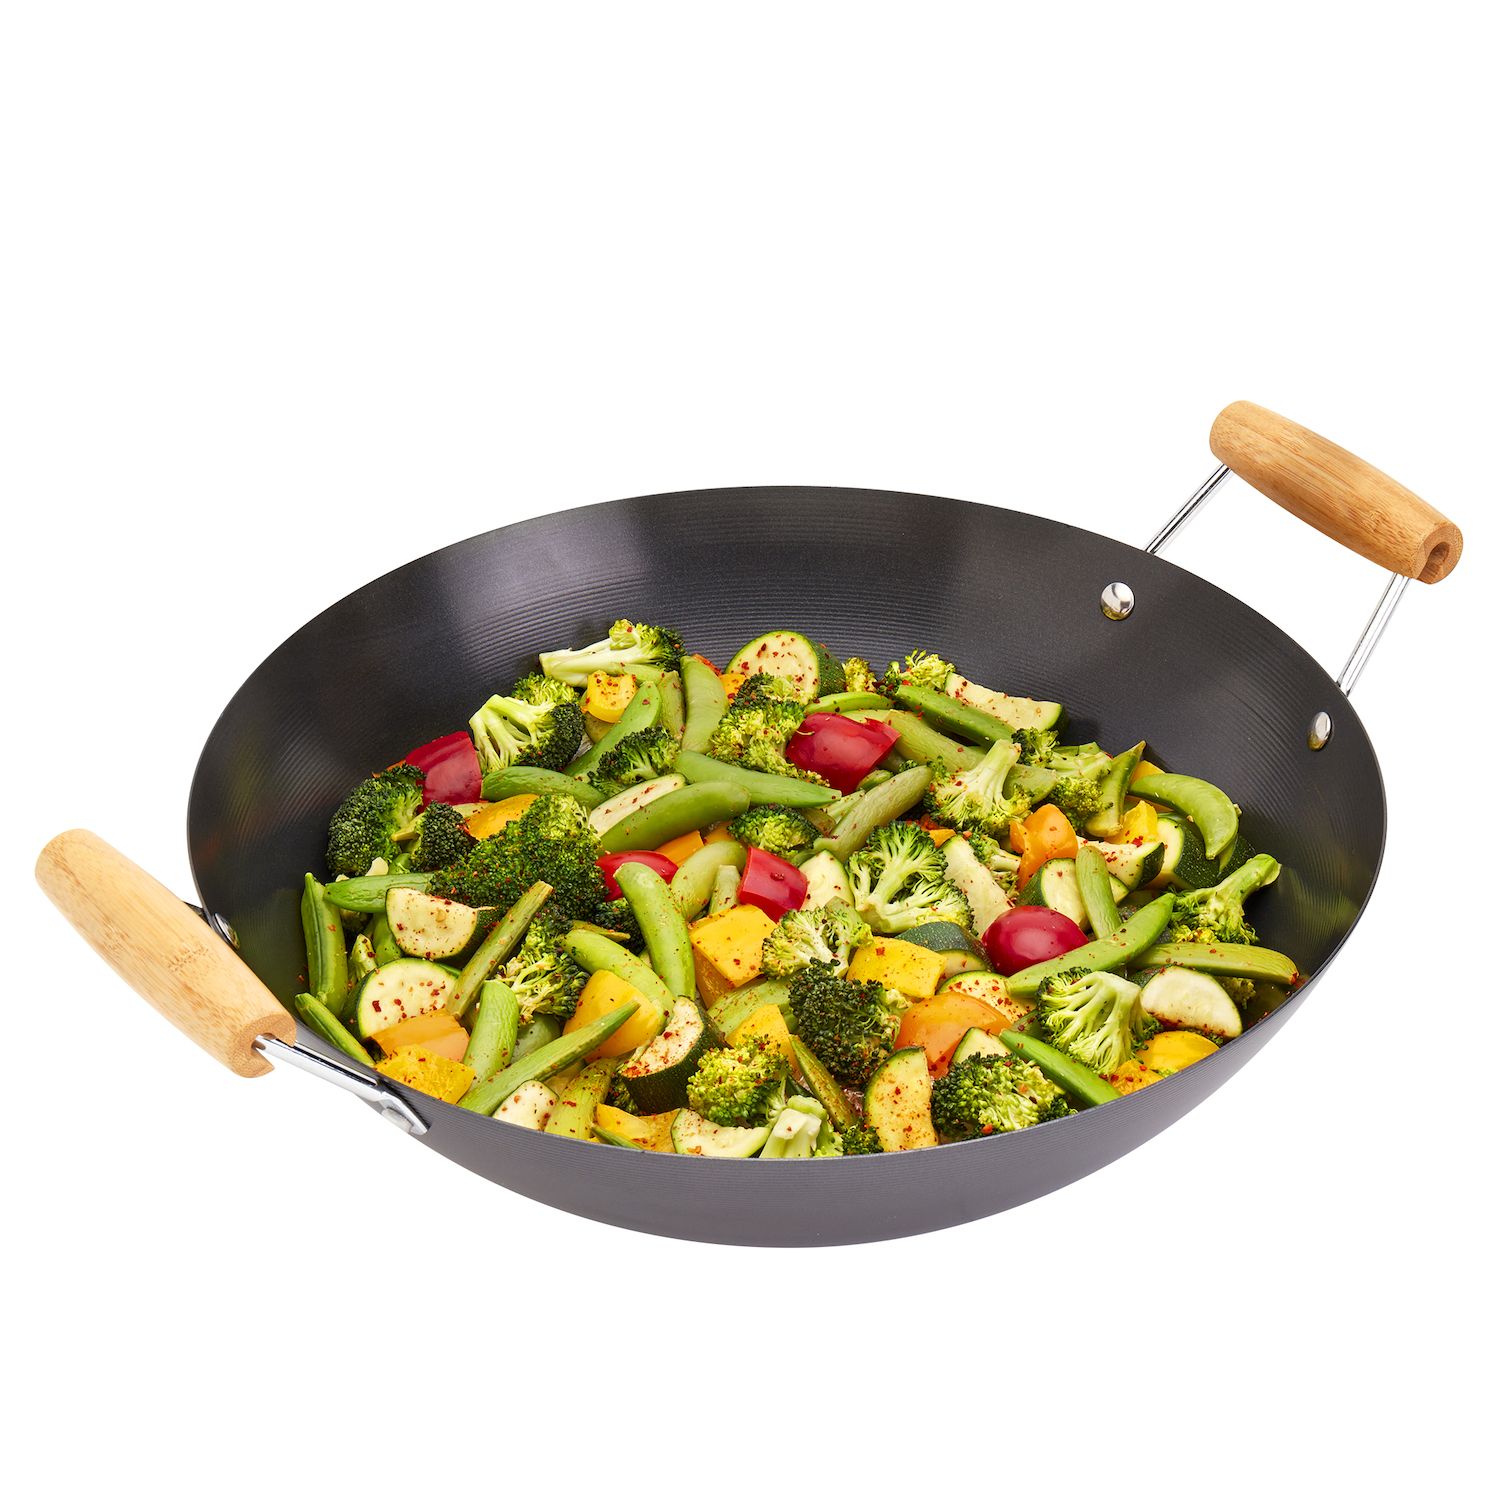 TECHEF CeraTerra - 12 Inch Wok/Stir-Fry Pan with Cover - On Sale